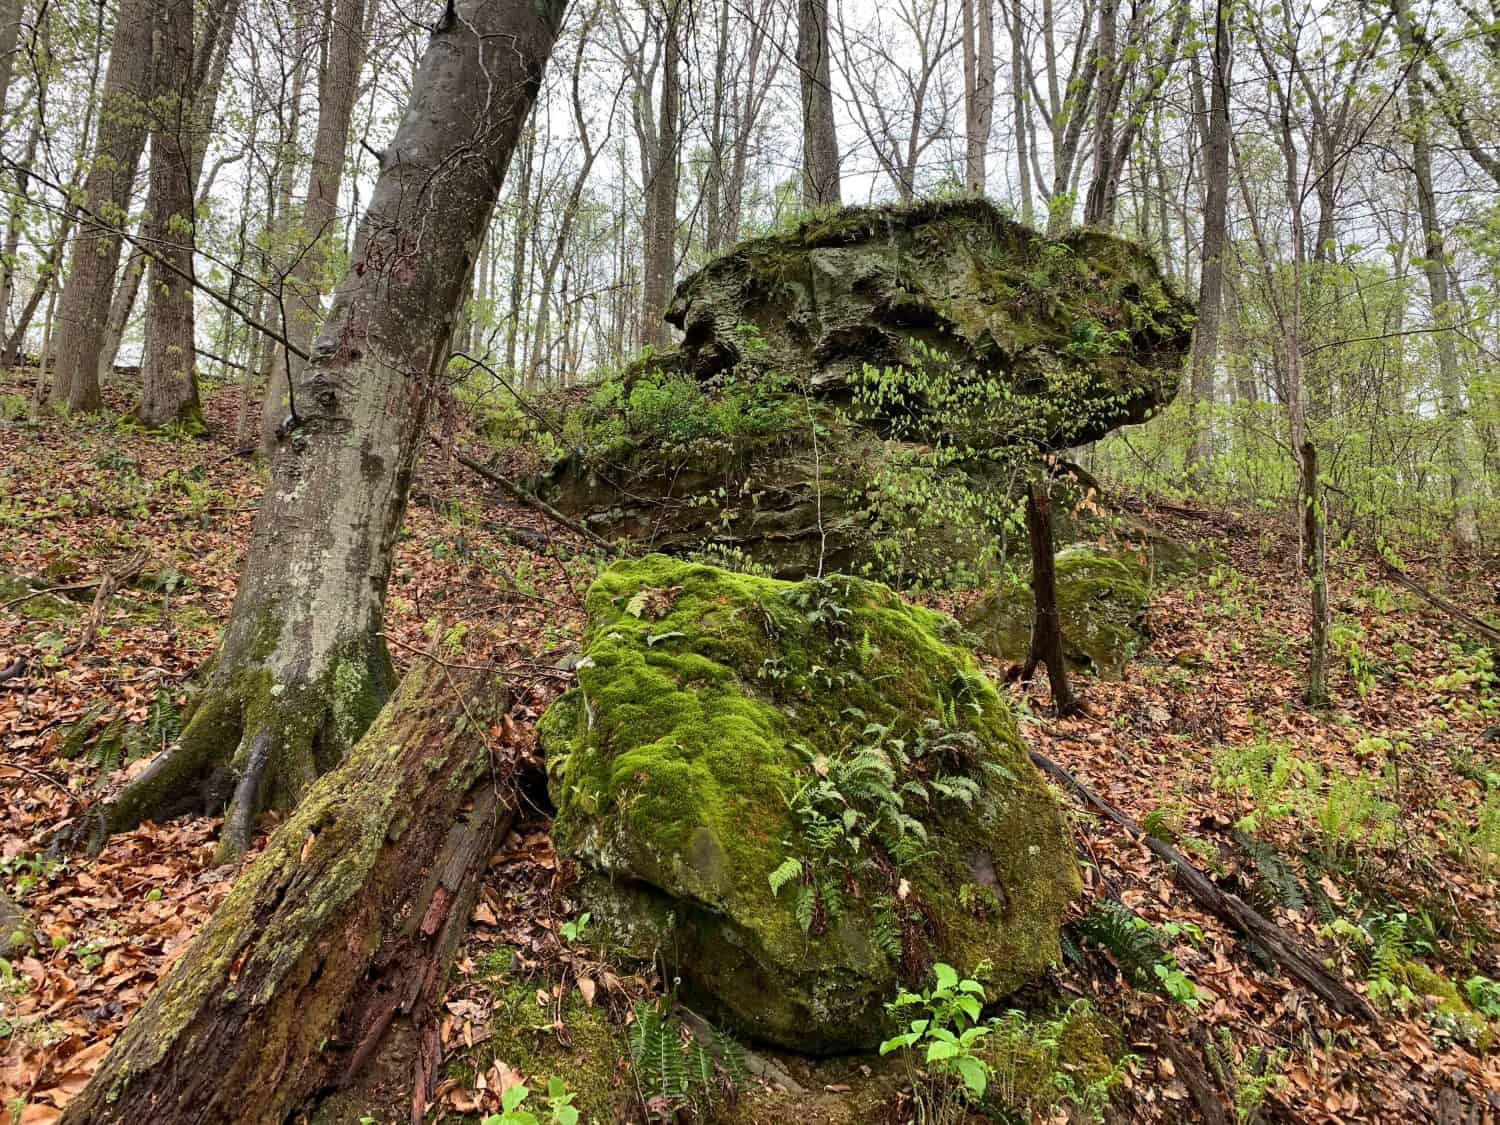 A balanced sandstone boulder stands on a forested bluff in Indiana.